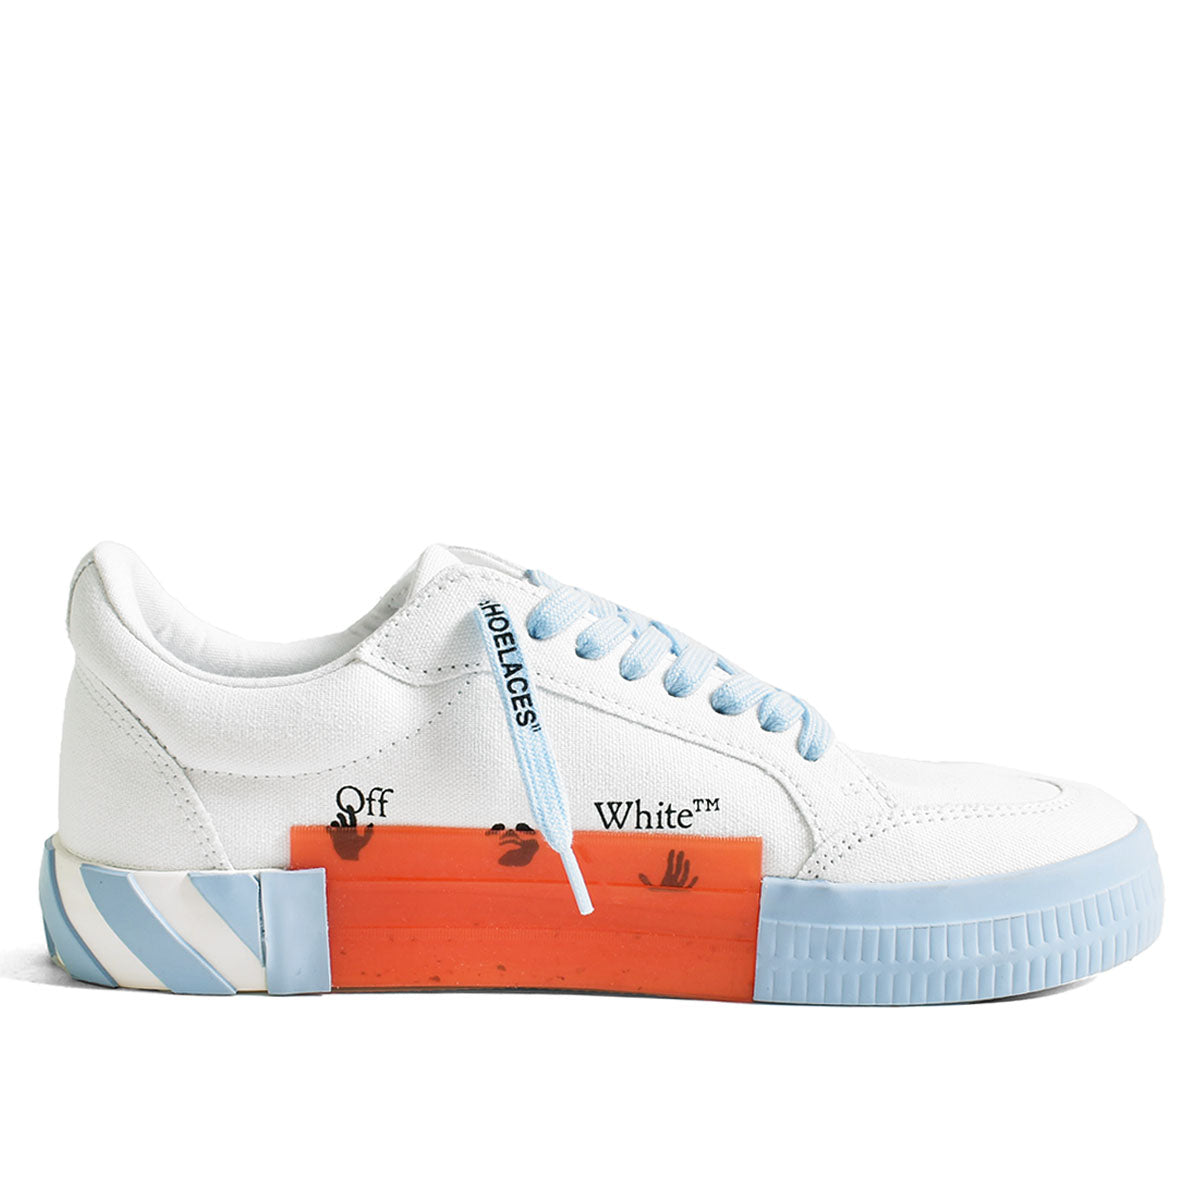 Off-White]LOW VULCANIZED CANVAS/WHITE/BLUE(OMIR23-SLG0004) – R&Co.